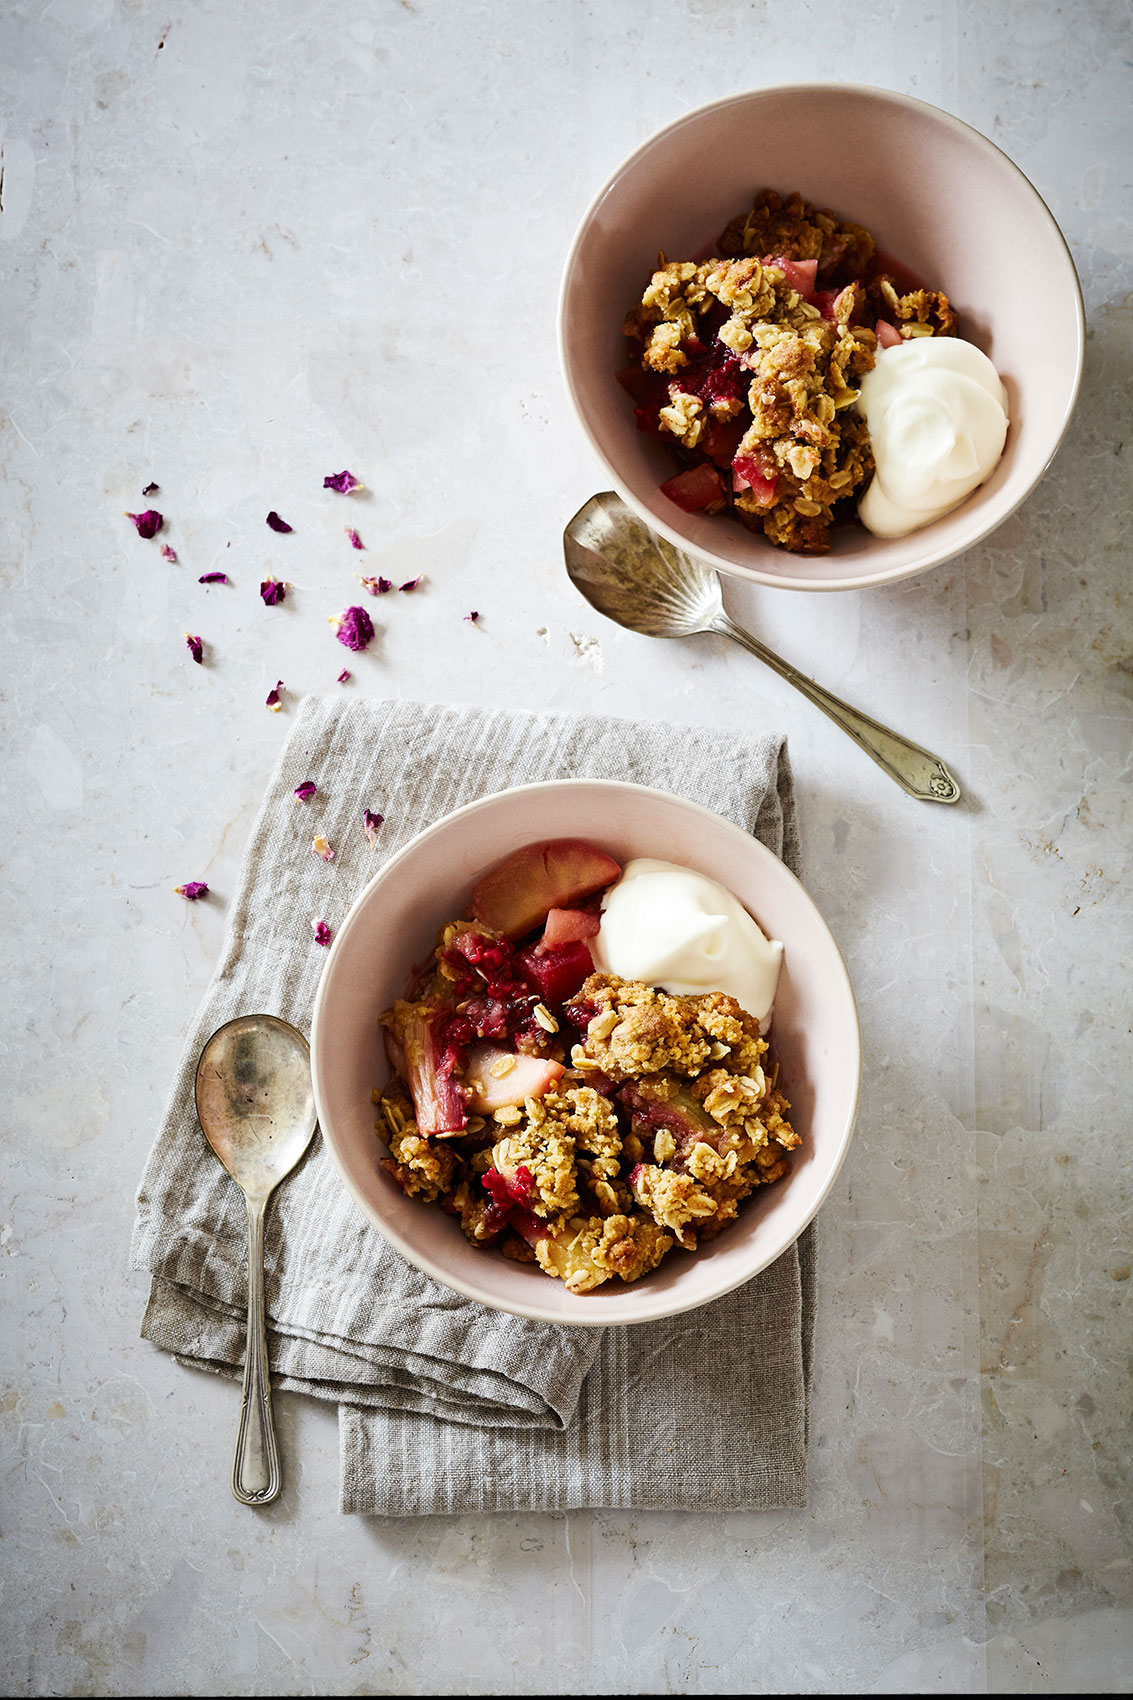 Slow Cooked • Rhubab Crumble with Fresh Cream & Flowers in Pastel Bowls • Cookbook & Editorial Food Photography